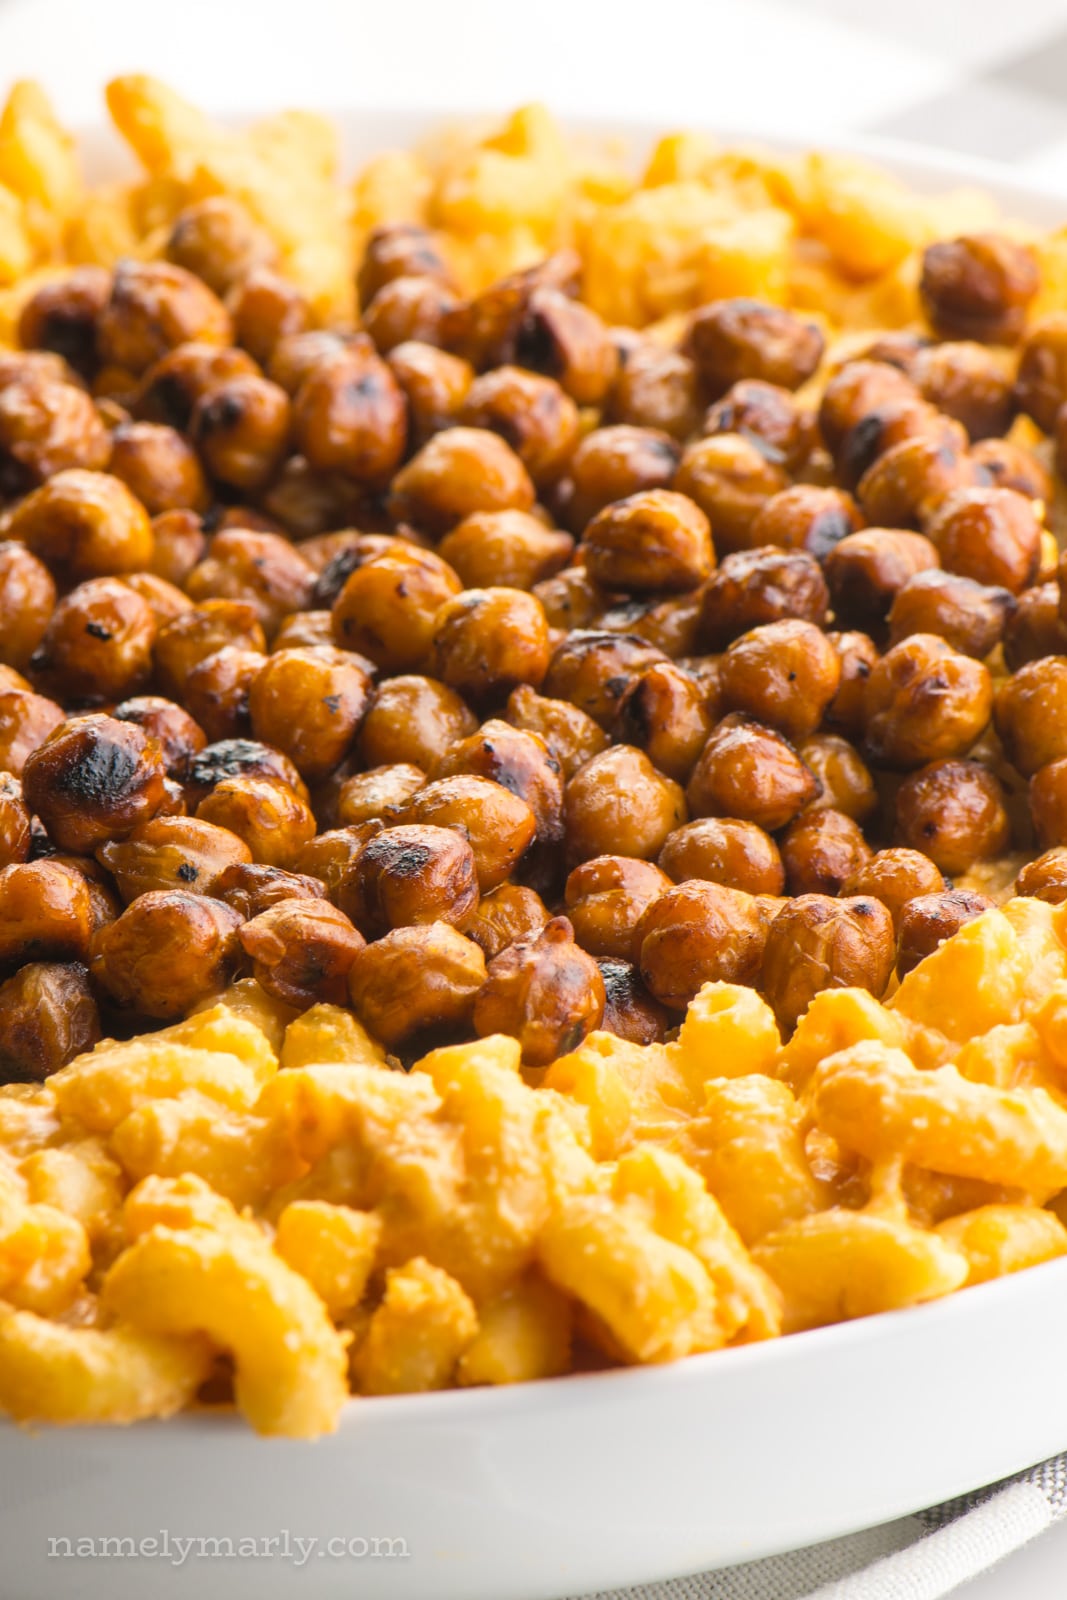 Looking a smoky roasted chickpeas in a bowl surrounded by vegan mac and cheese.